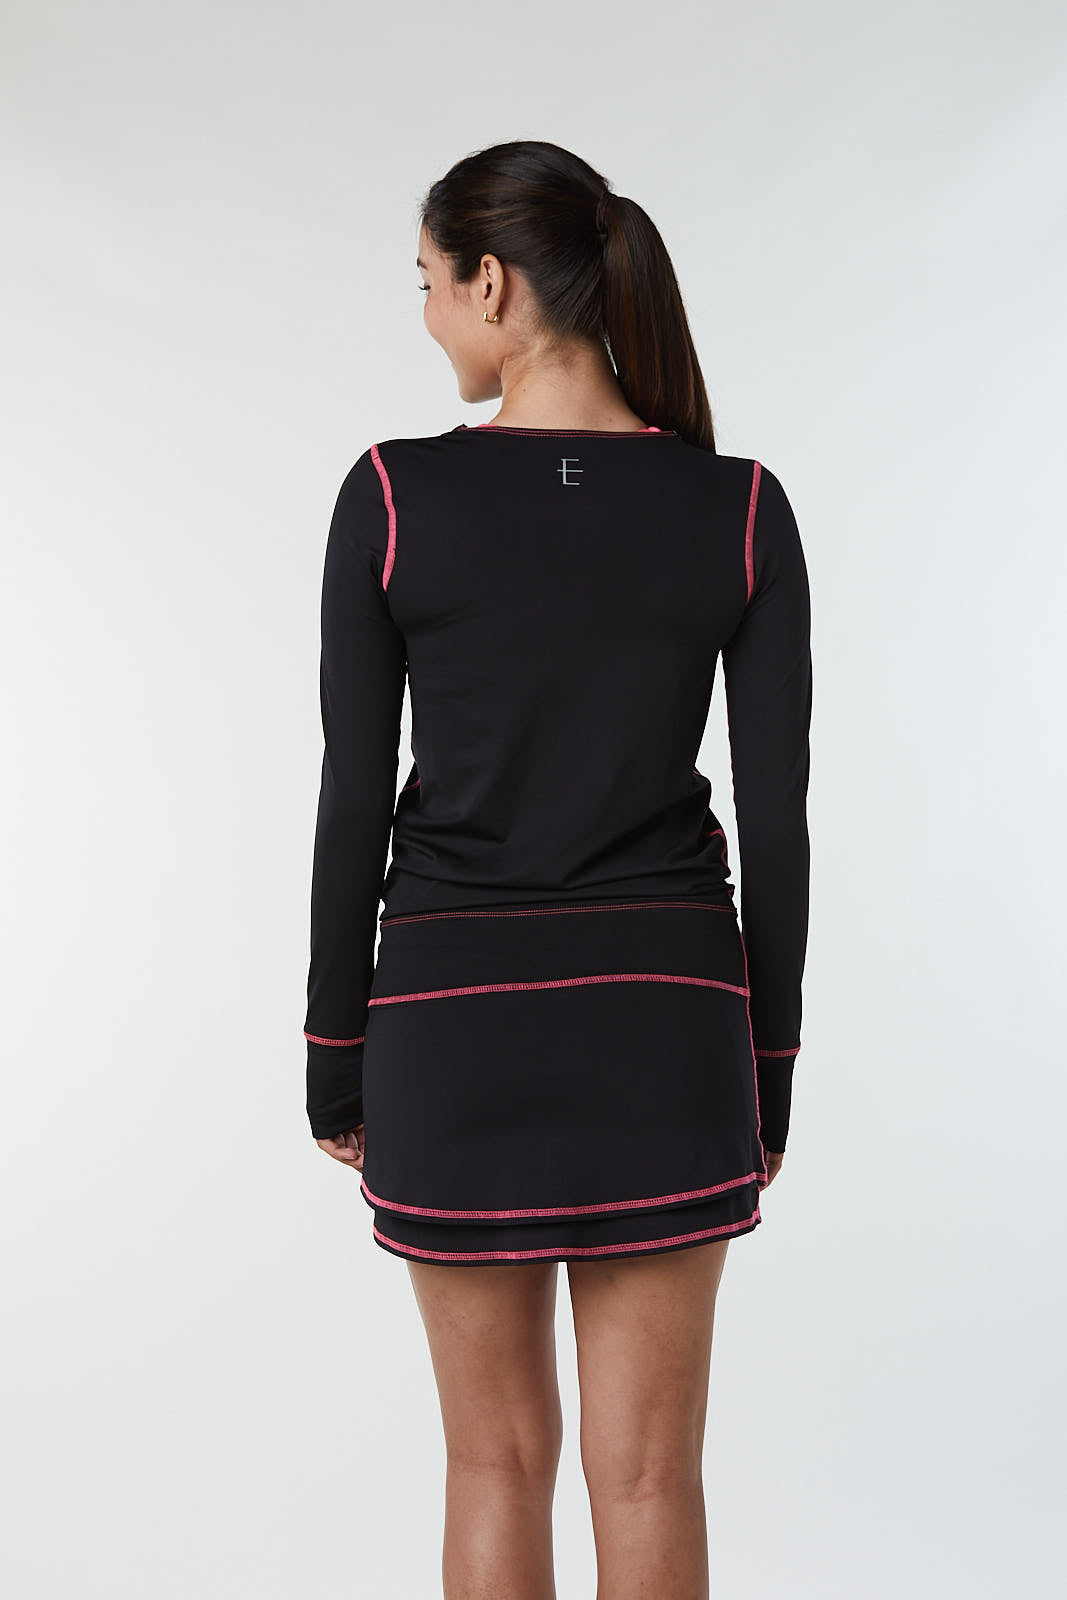 The Signature Long-Sleeved Dress